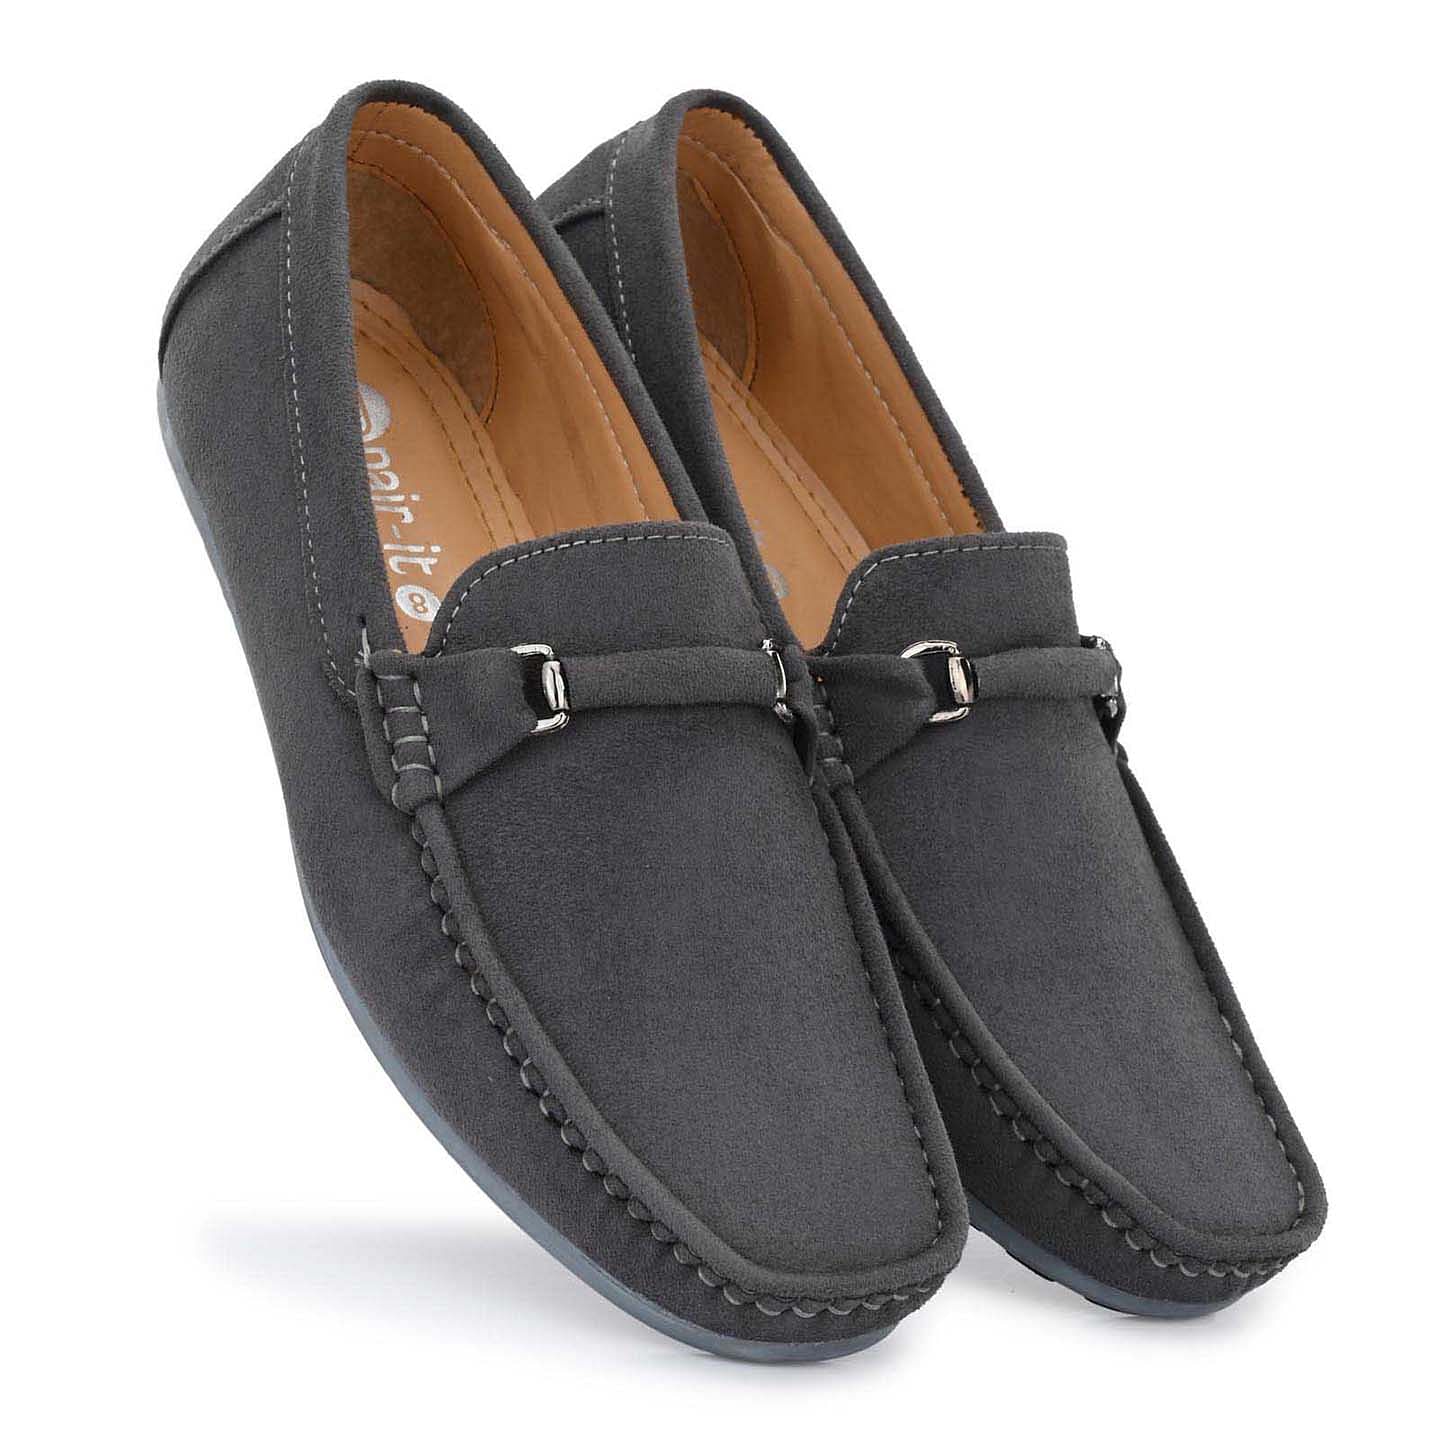 Pair-it Men's Loafers Shoes - Grey - LZ-Loafer104